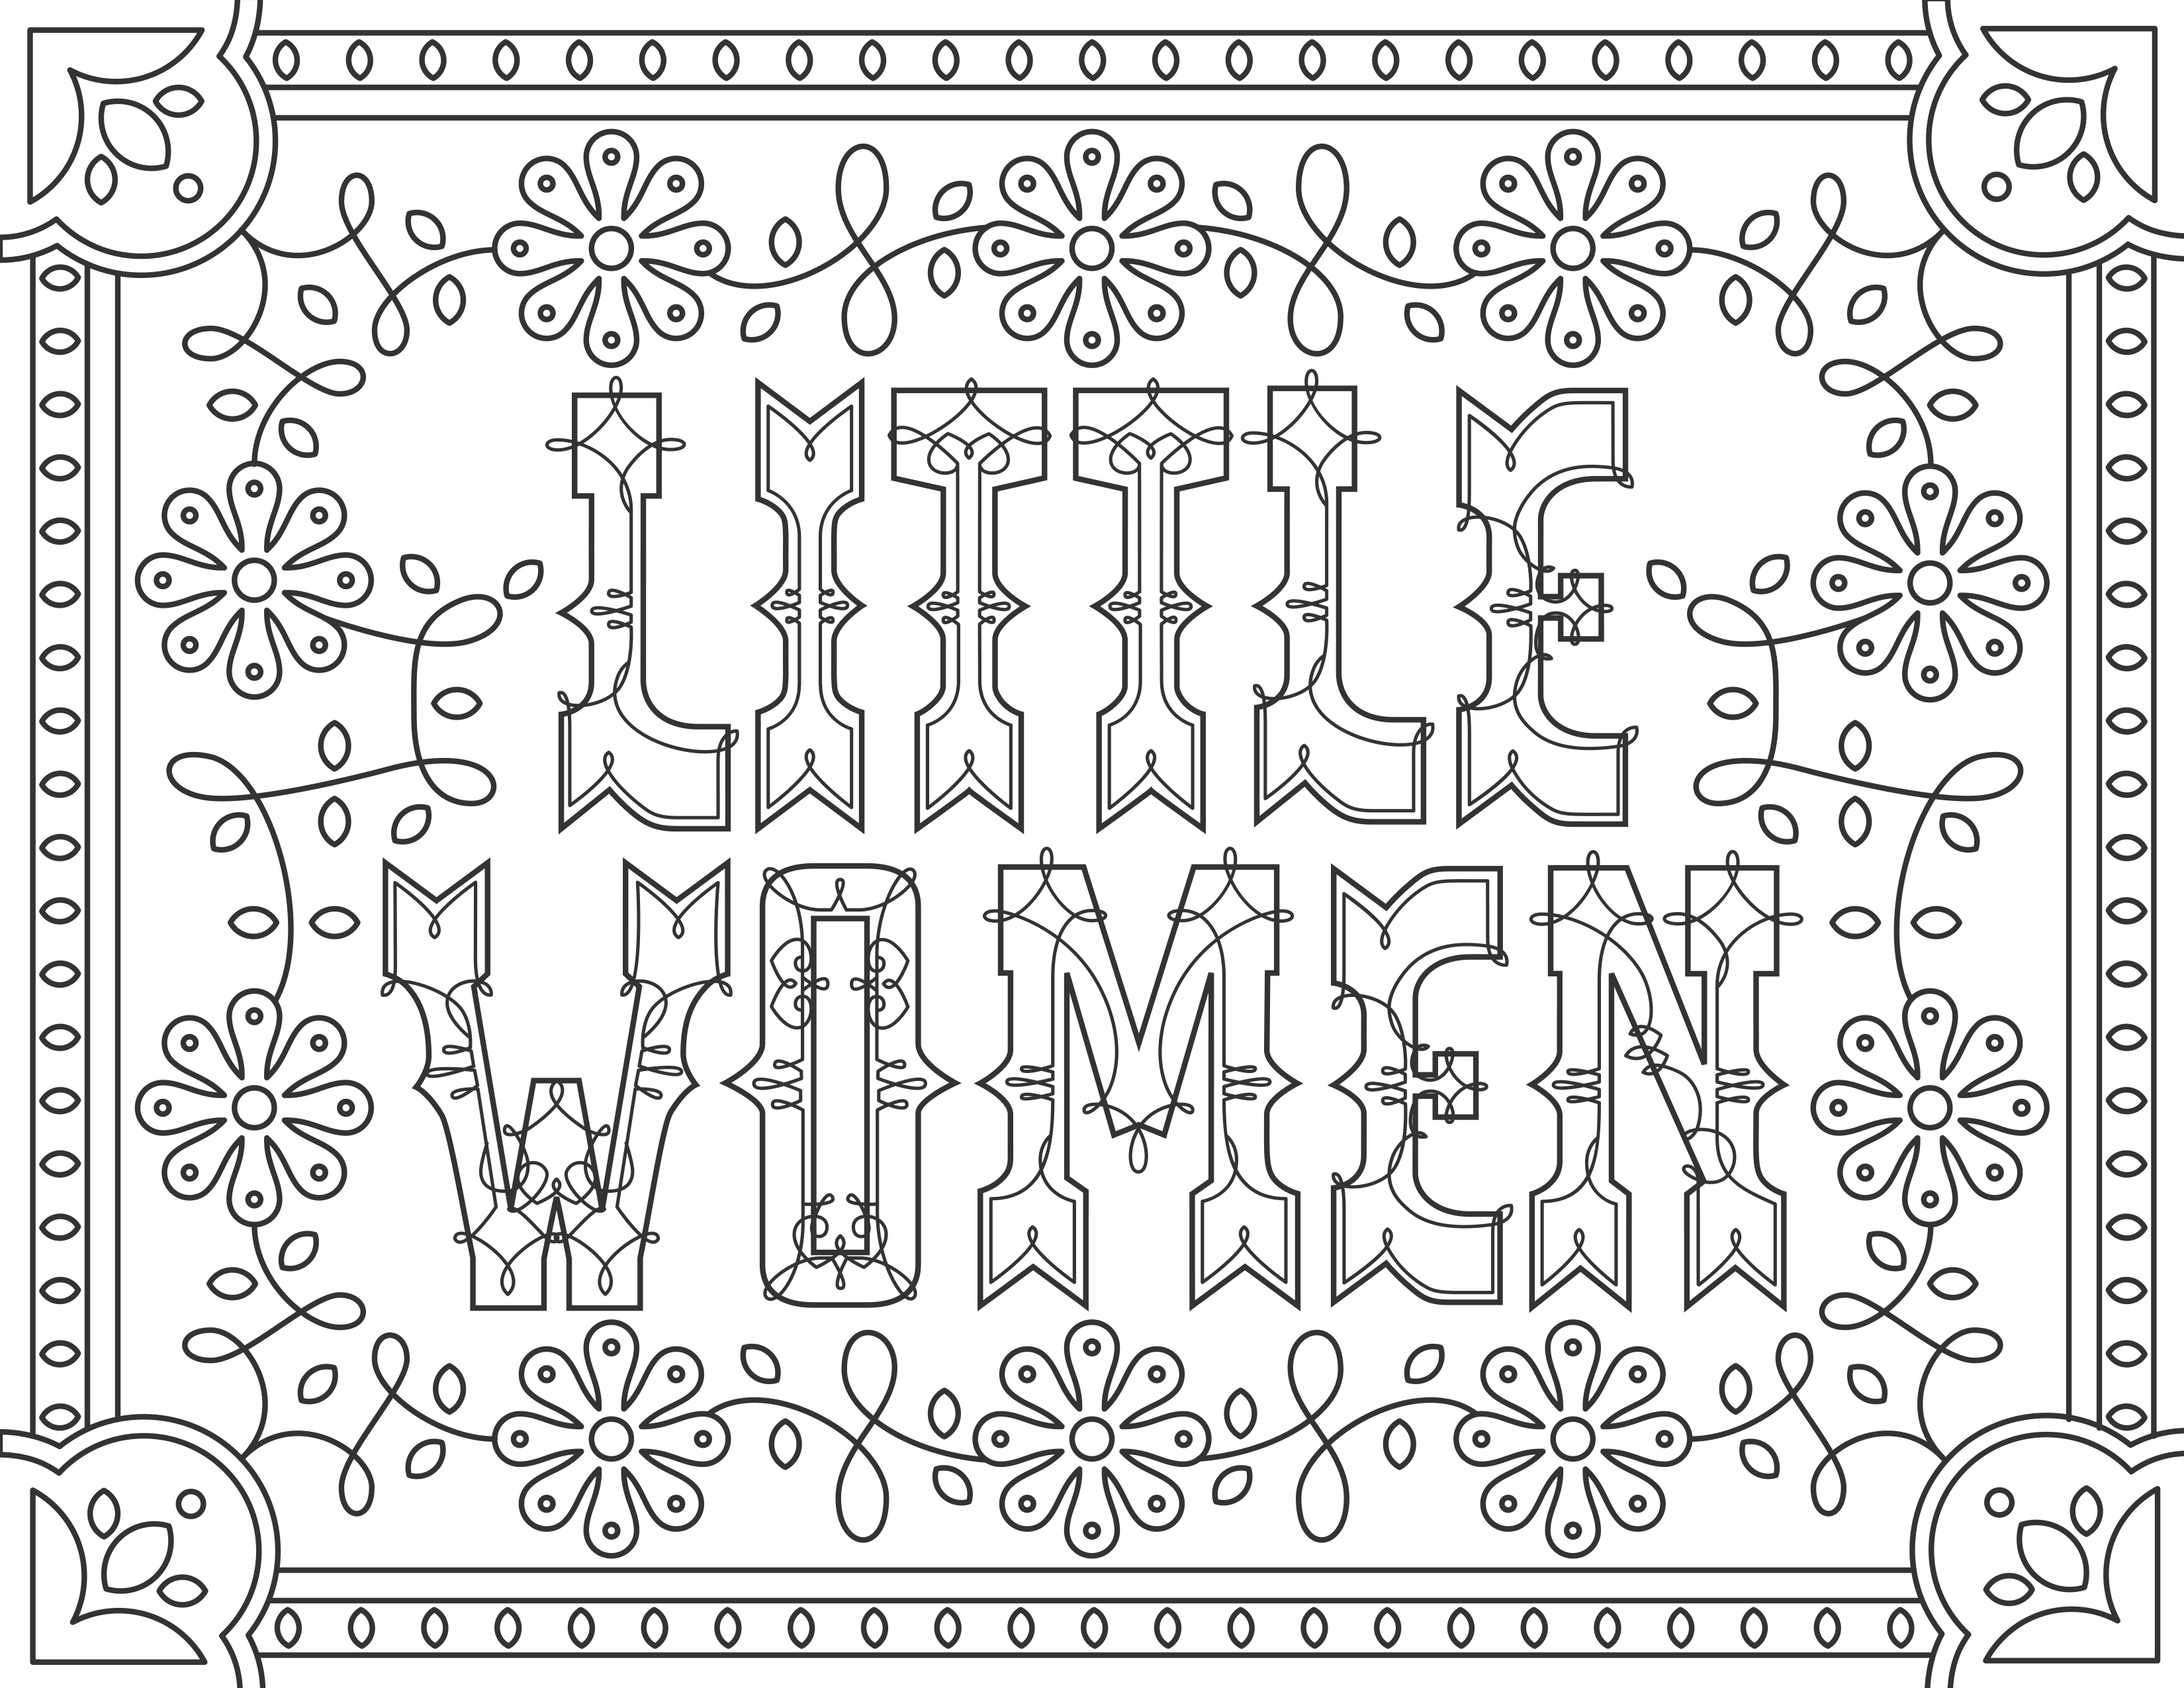 Coloring page inspired by the Movie 'Little Women', for the website Readers.com.